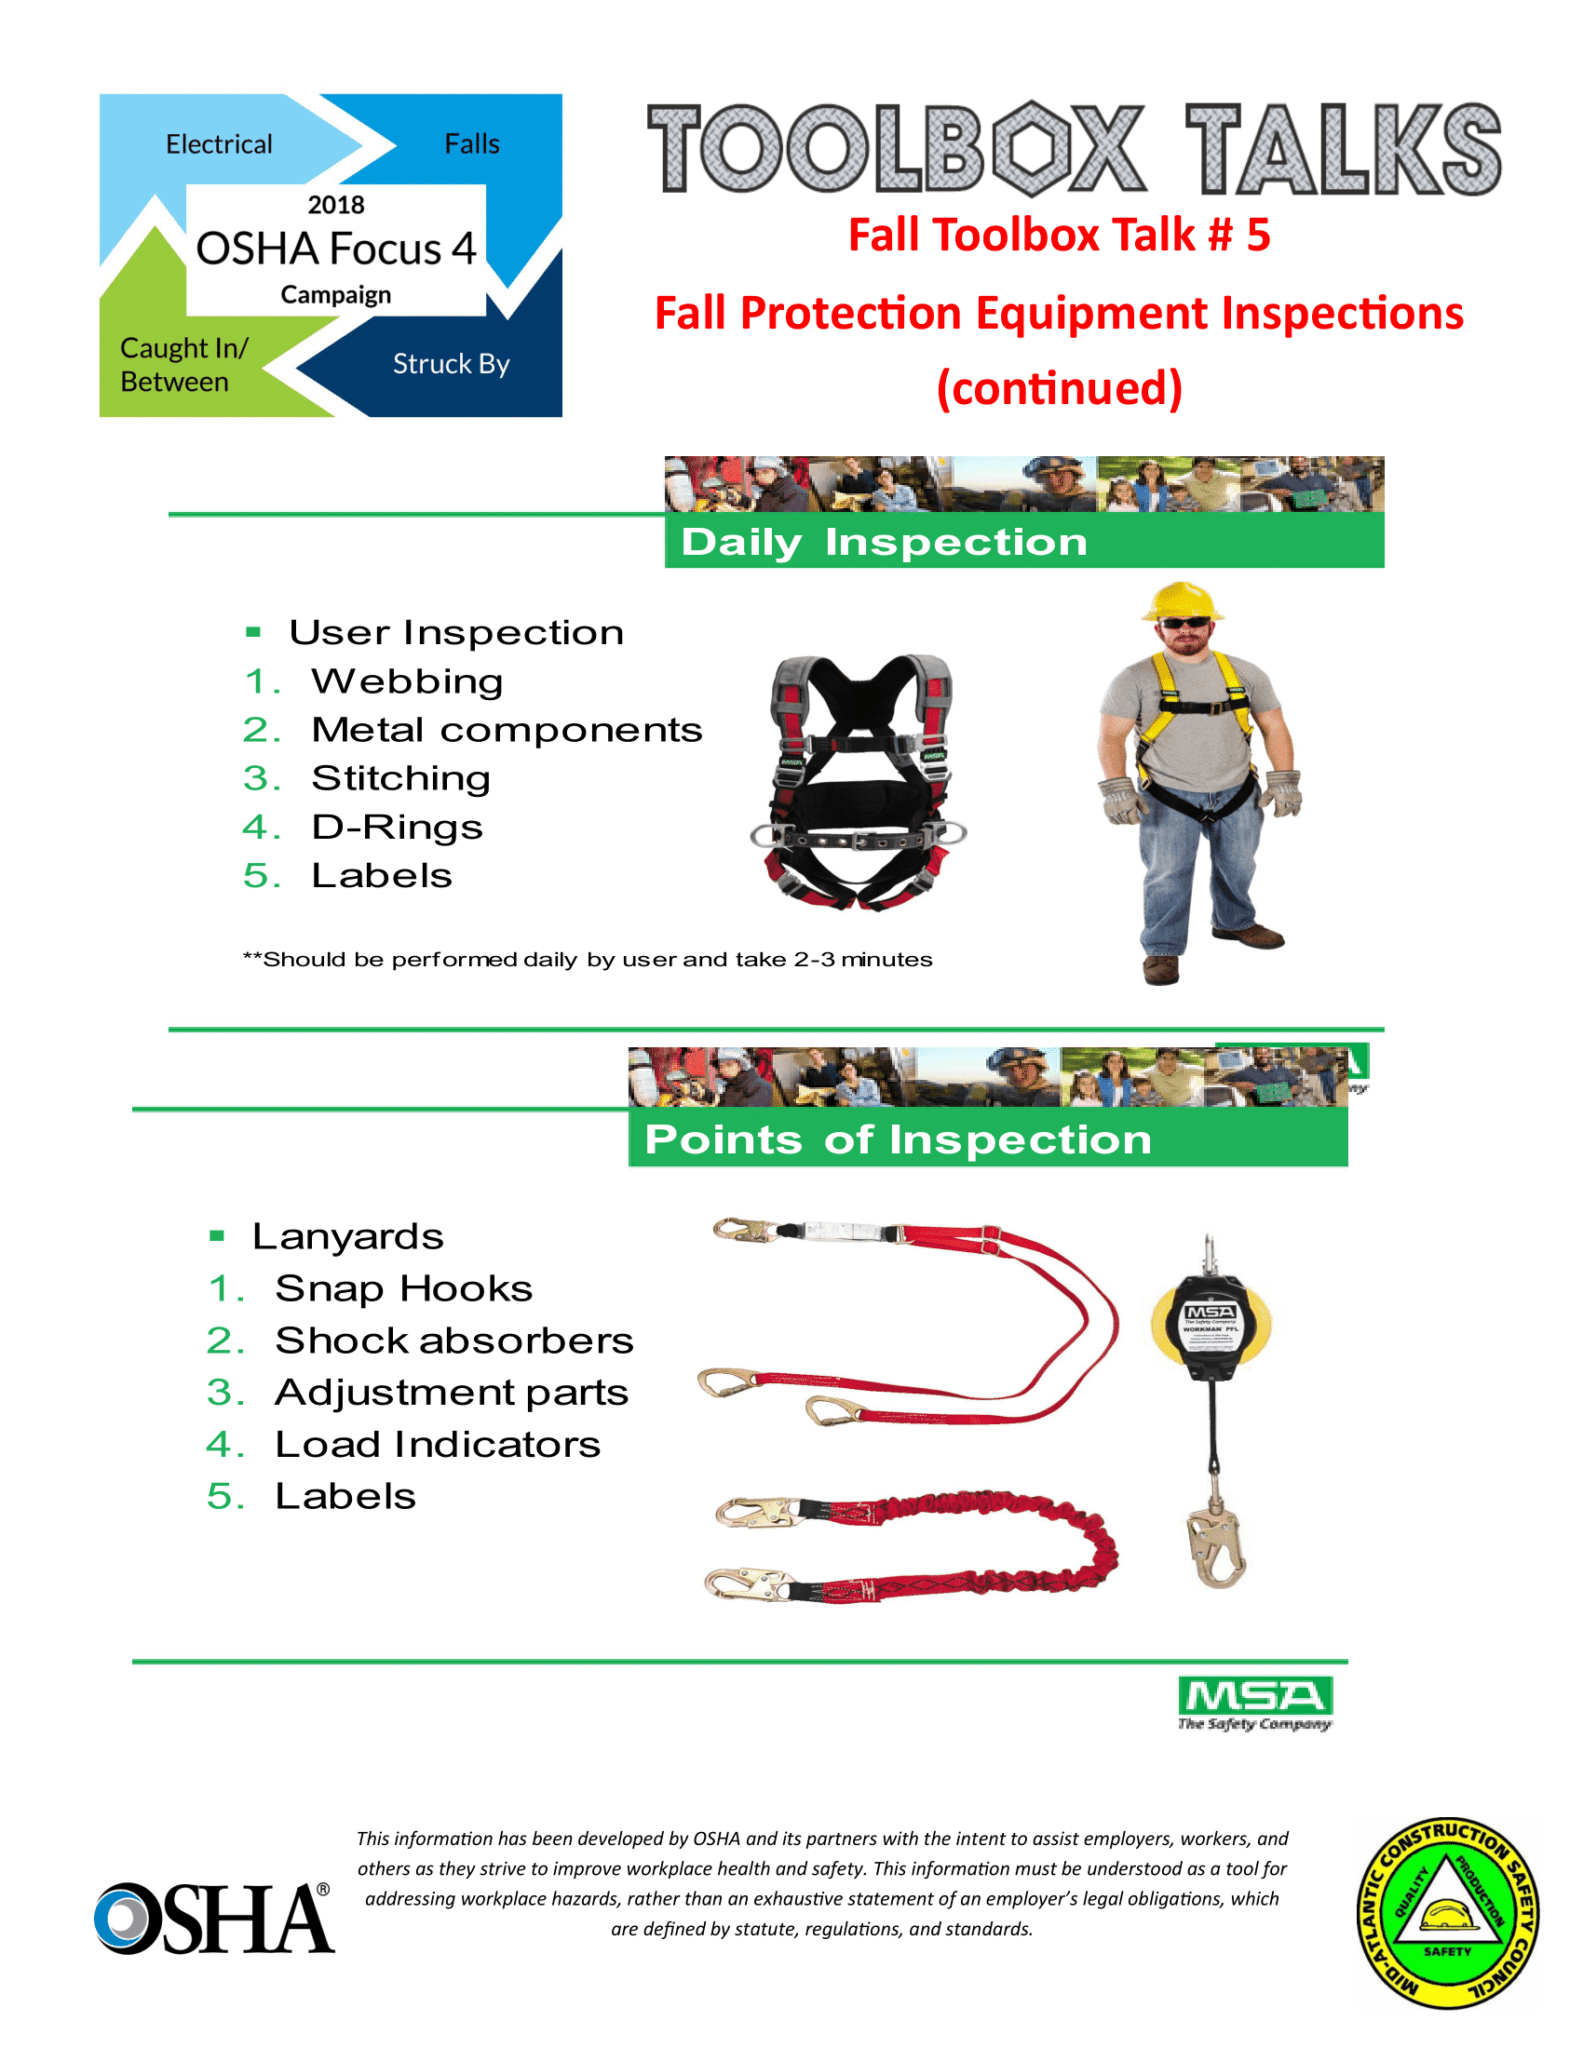 2019.05.2020Fall20toolbox20talk205 Fall20protection20inspections 2 1583x2048 